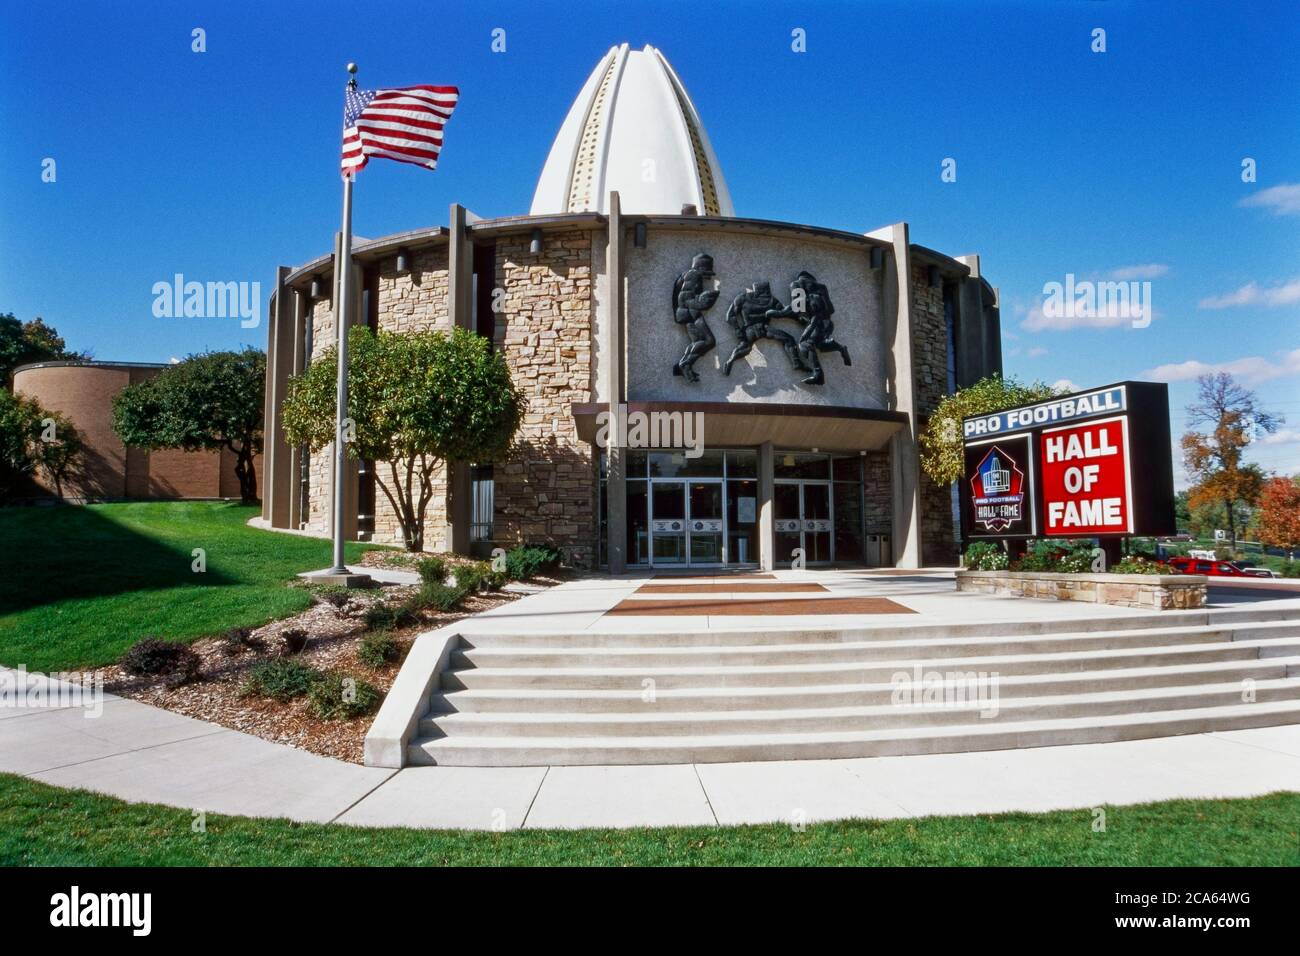 Pro football hall of fame hi-res stock photography and images - Alamy